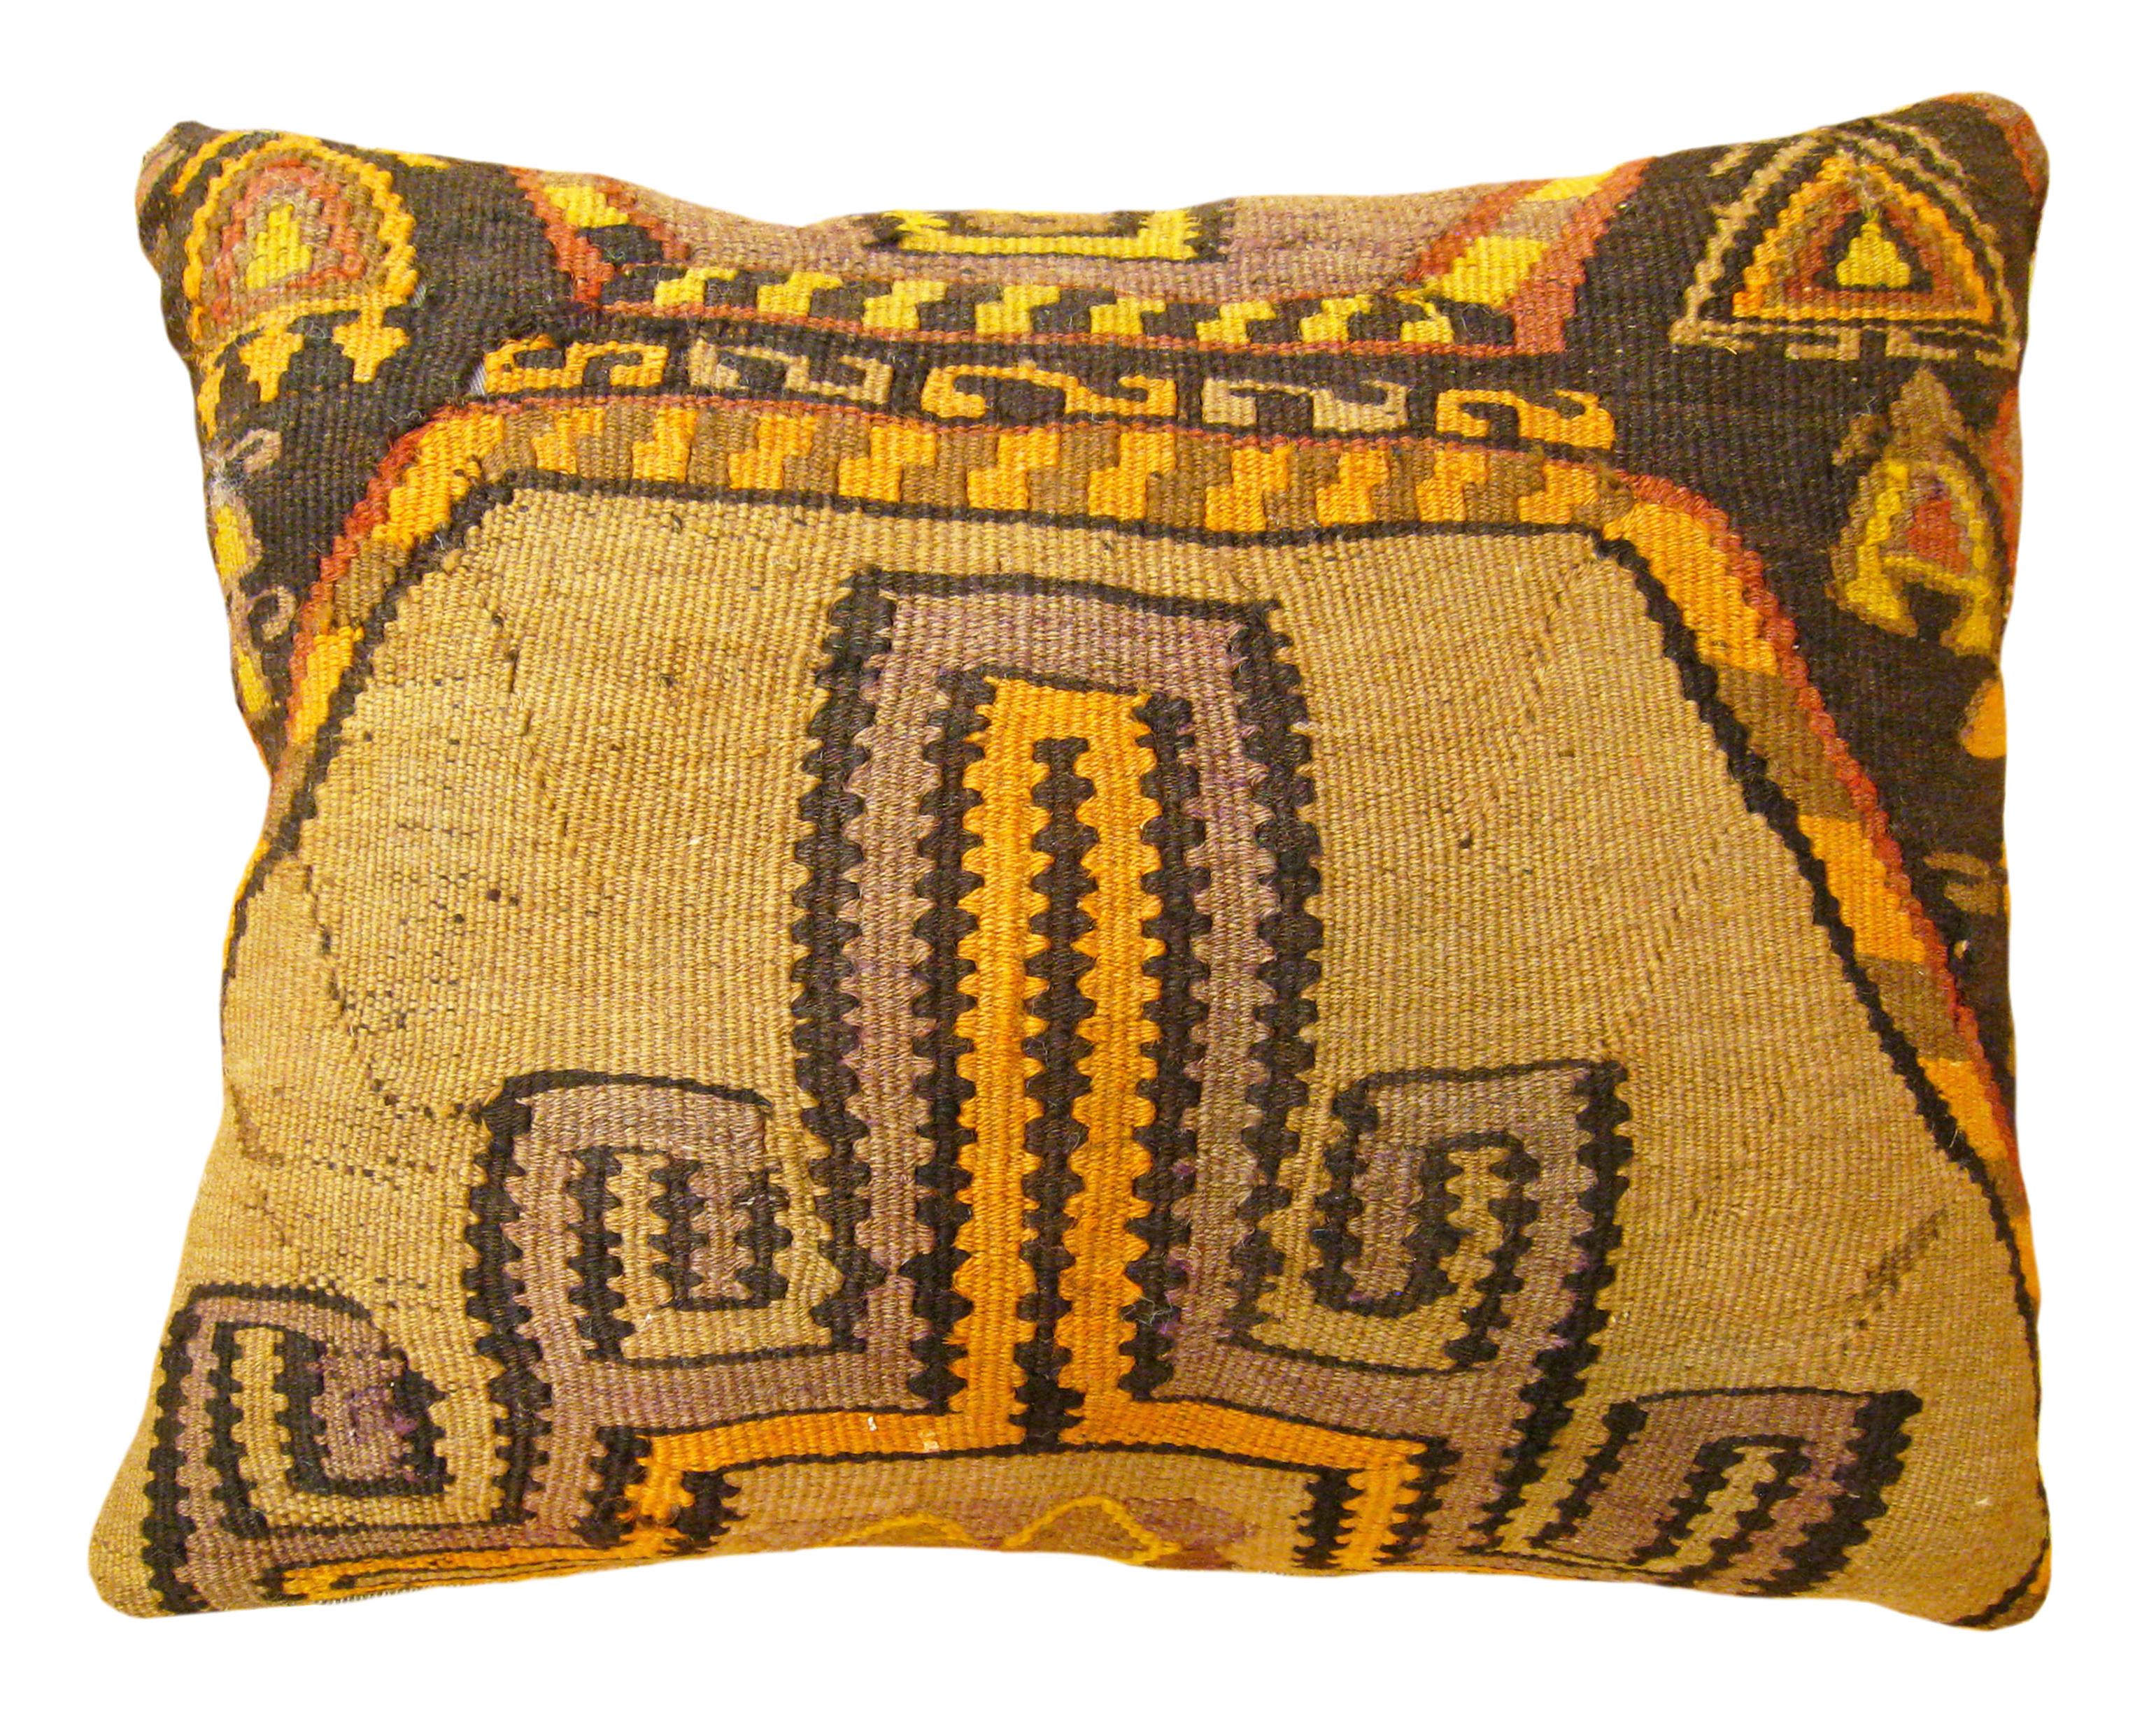 Pair of Decorative Vintage Turkish Kilim Rug Pillows with Geometric Abstracts For Sale 3